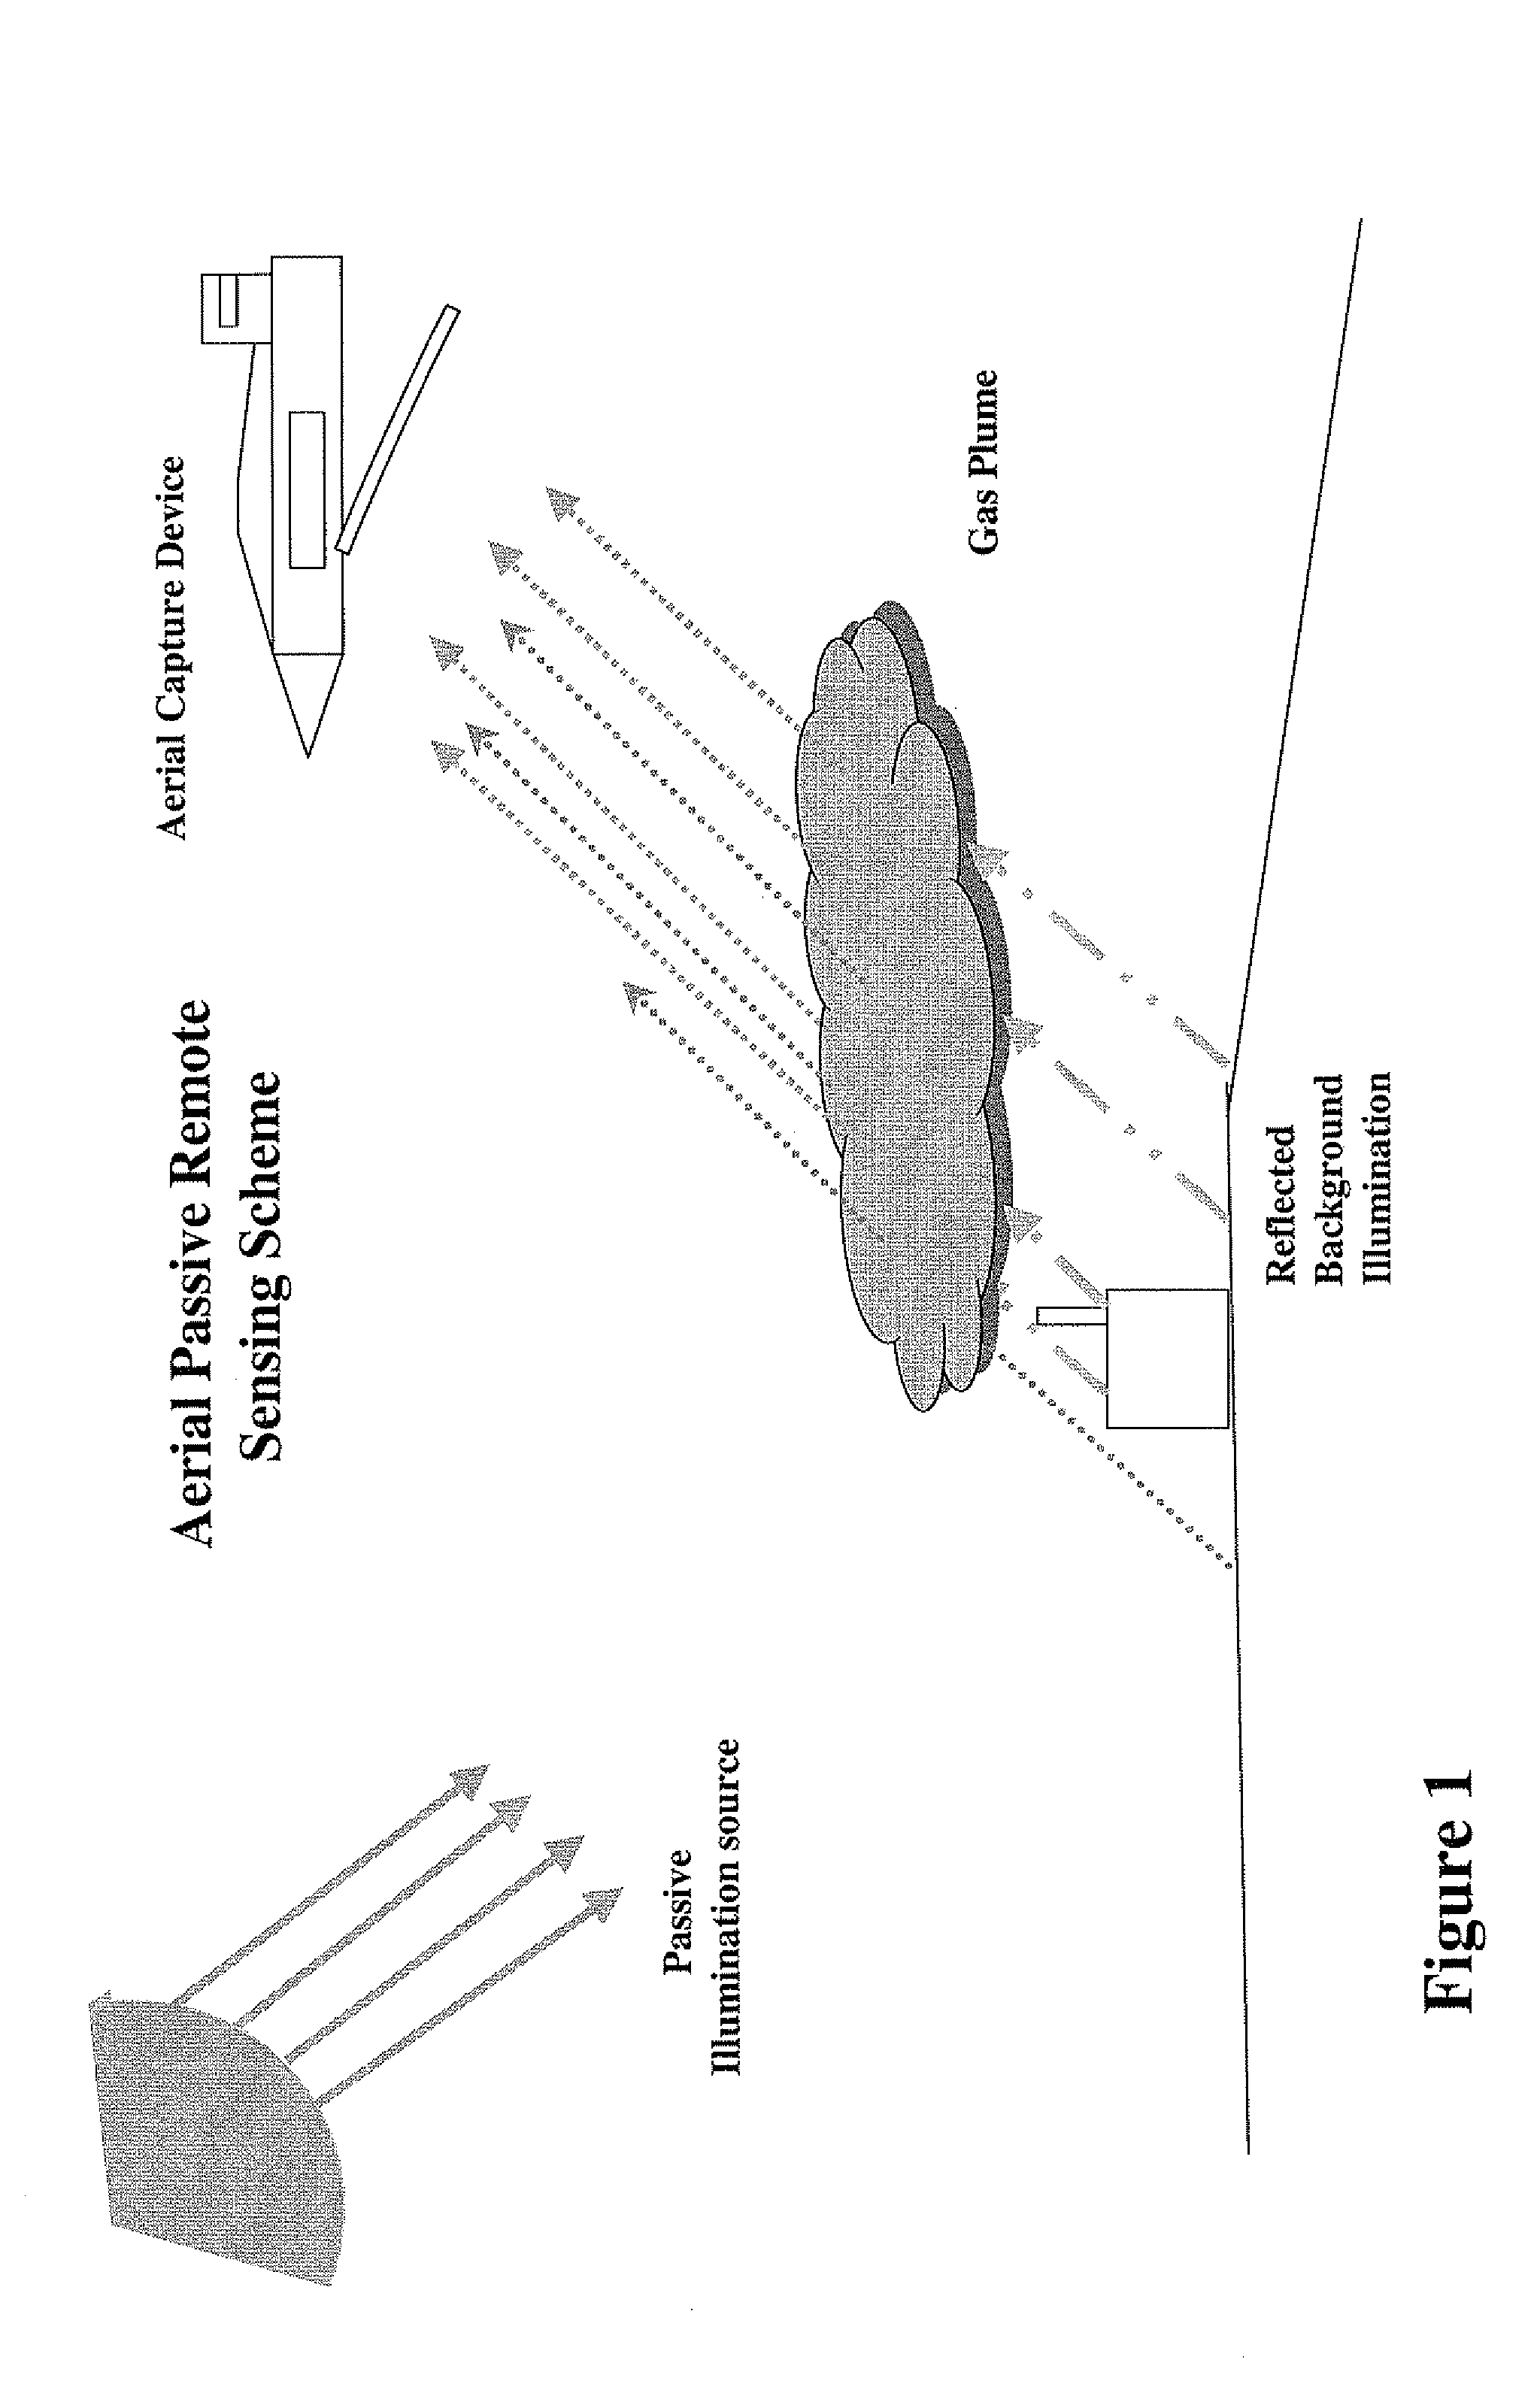 Method for remote spectral analysis of gas plumes